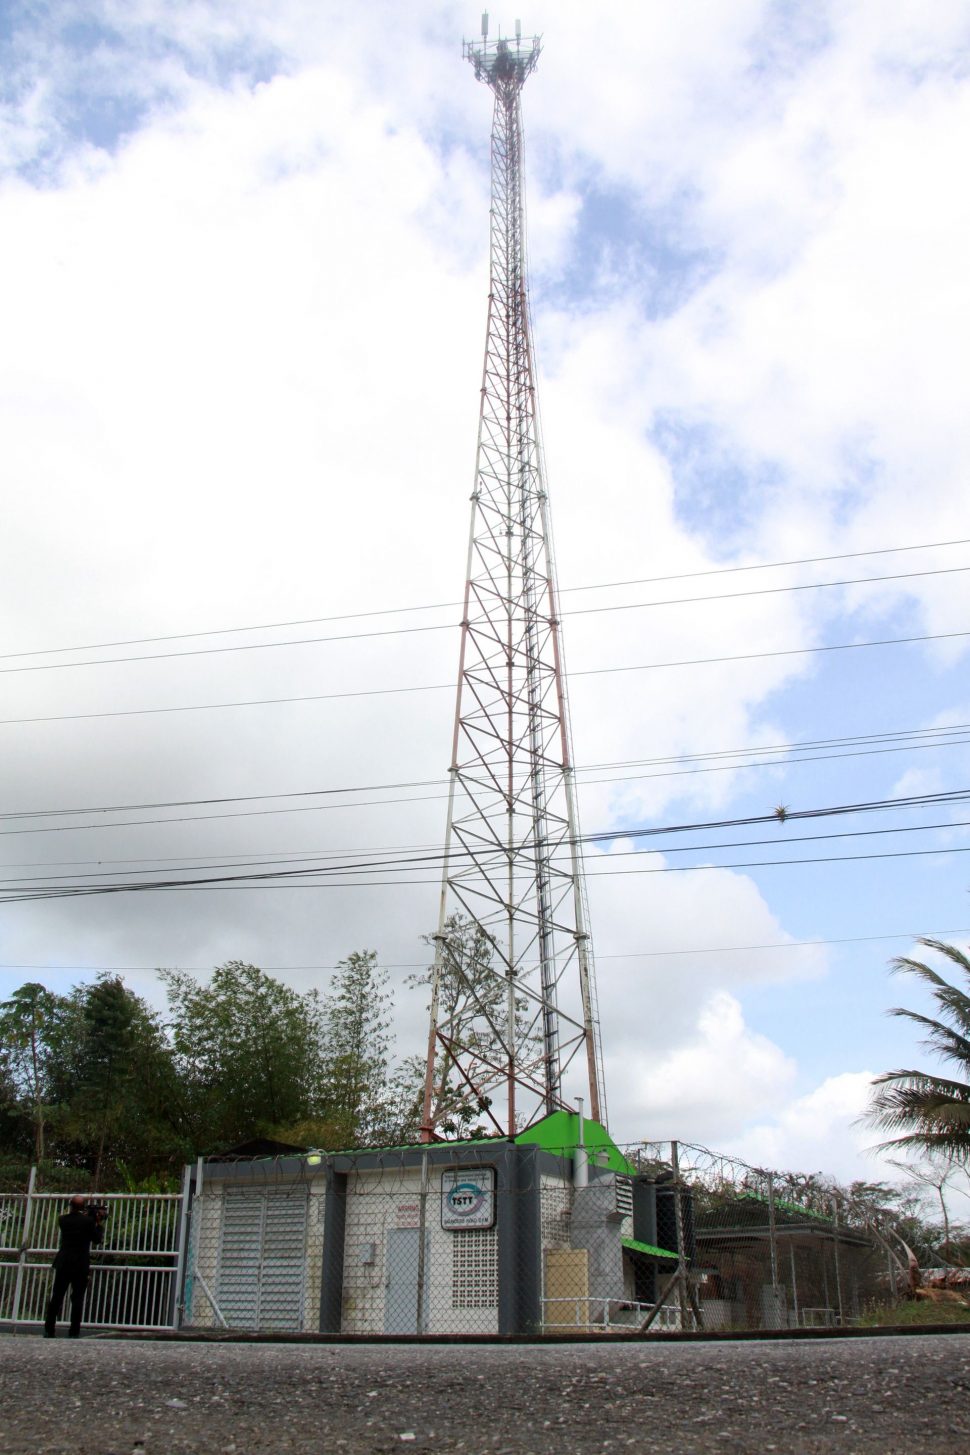 The cell tower at St Mary’s, Moruga, where a man climbed up on Tuesday.